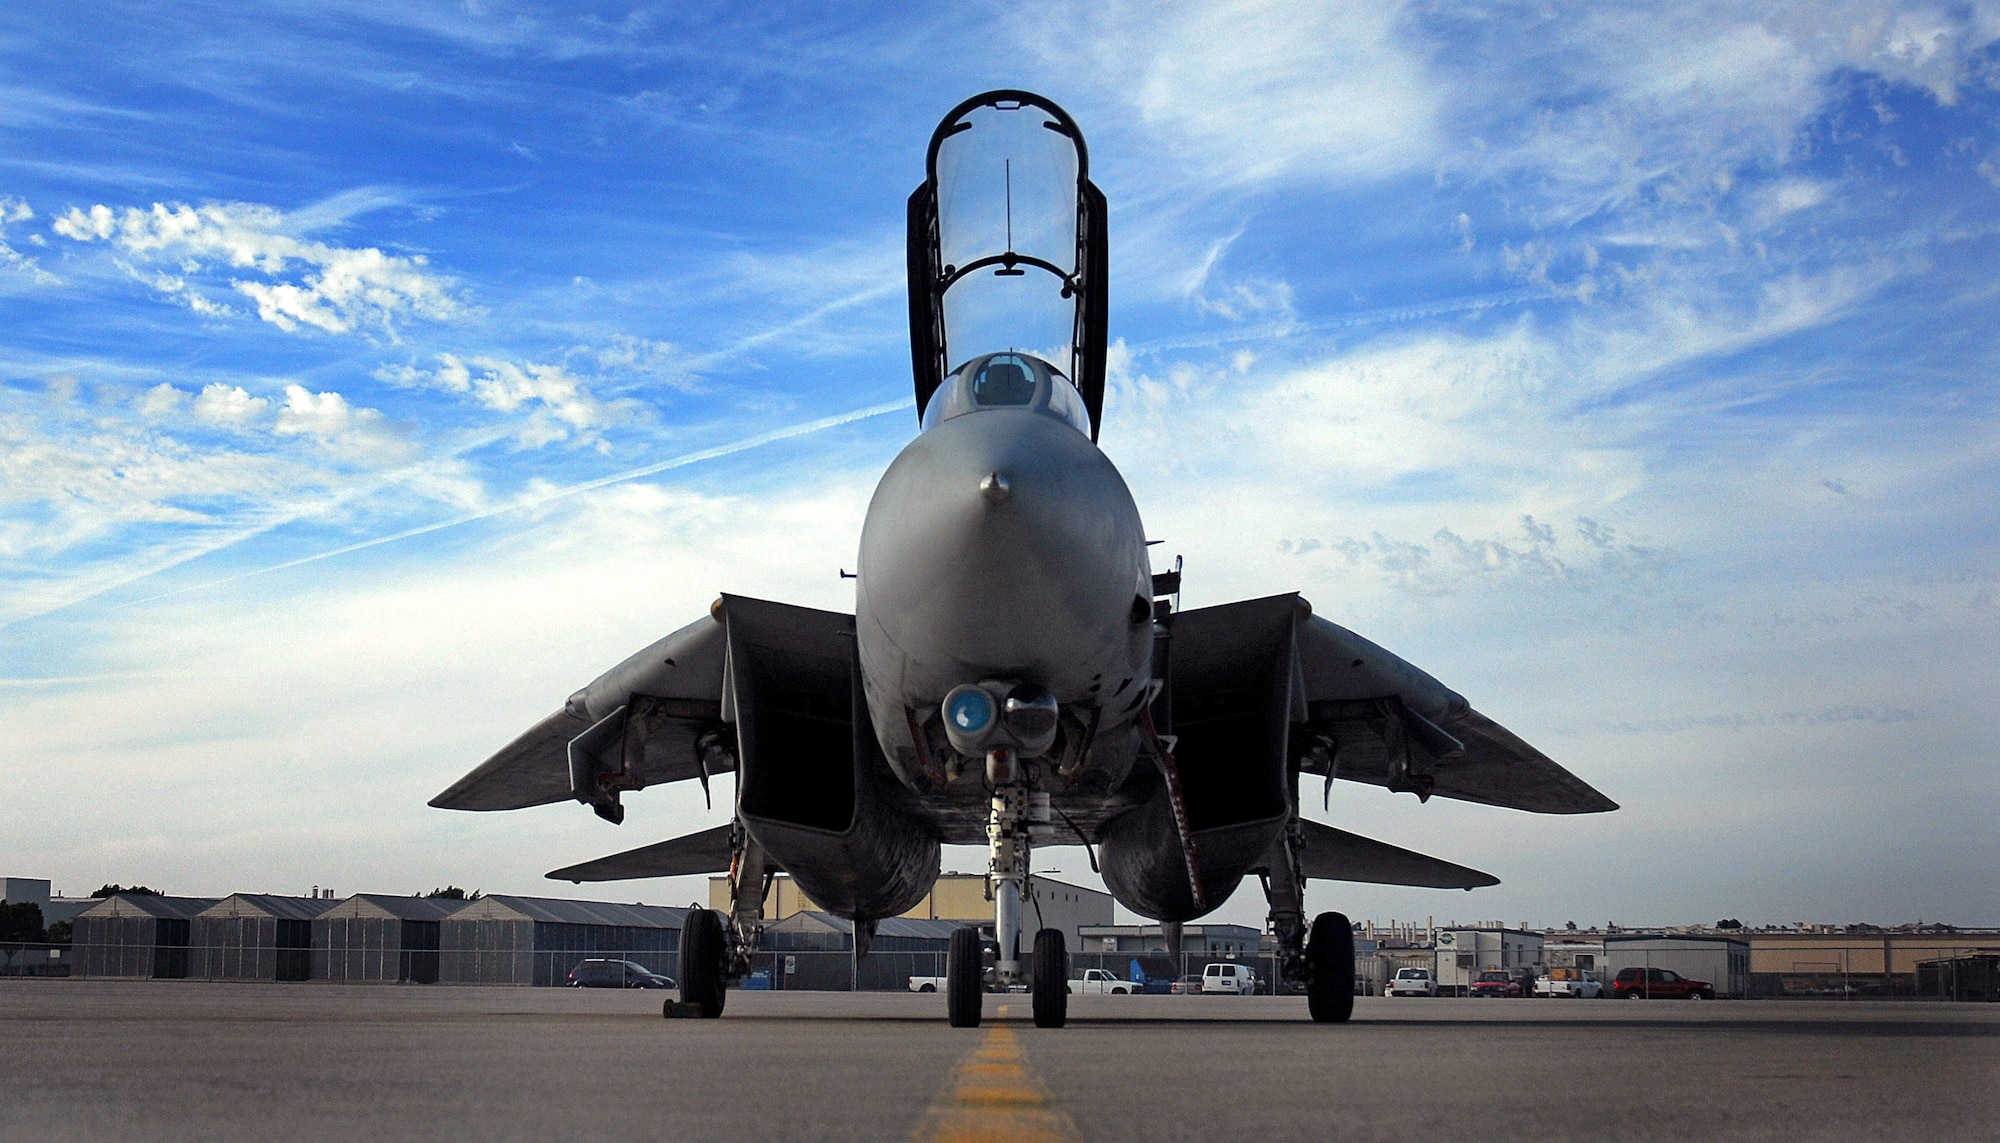 A U.S. Navy F-14 Tomcat aircraft sits on the flight line after completing its final flight at Naval Base North Island, San Diego, Calif., Sept. 29, 2006. After 36 years of service, the Tomcat was replaced by the F/A-18E/F Super Hornet aircraft. 